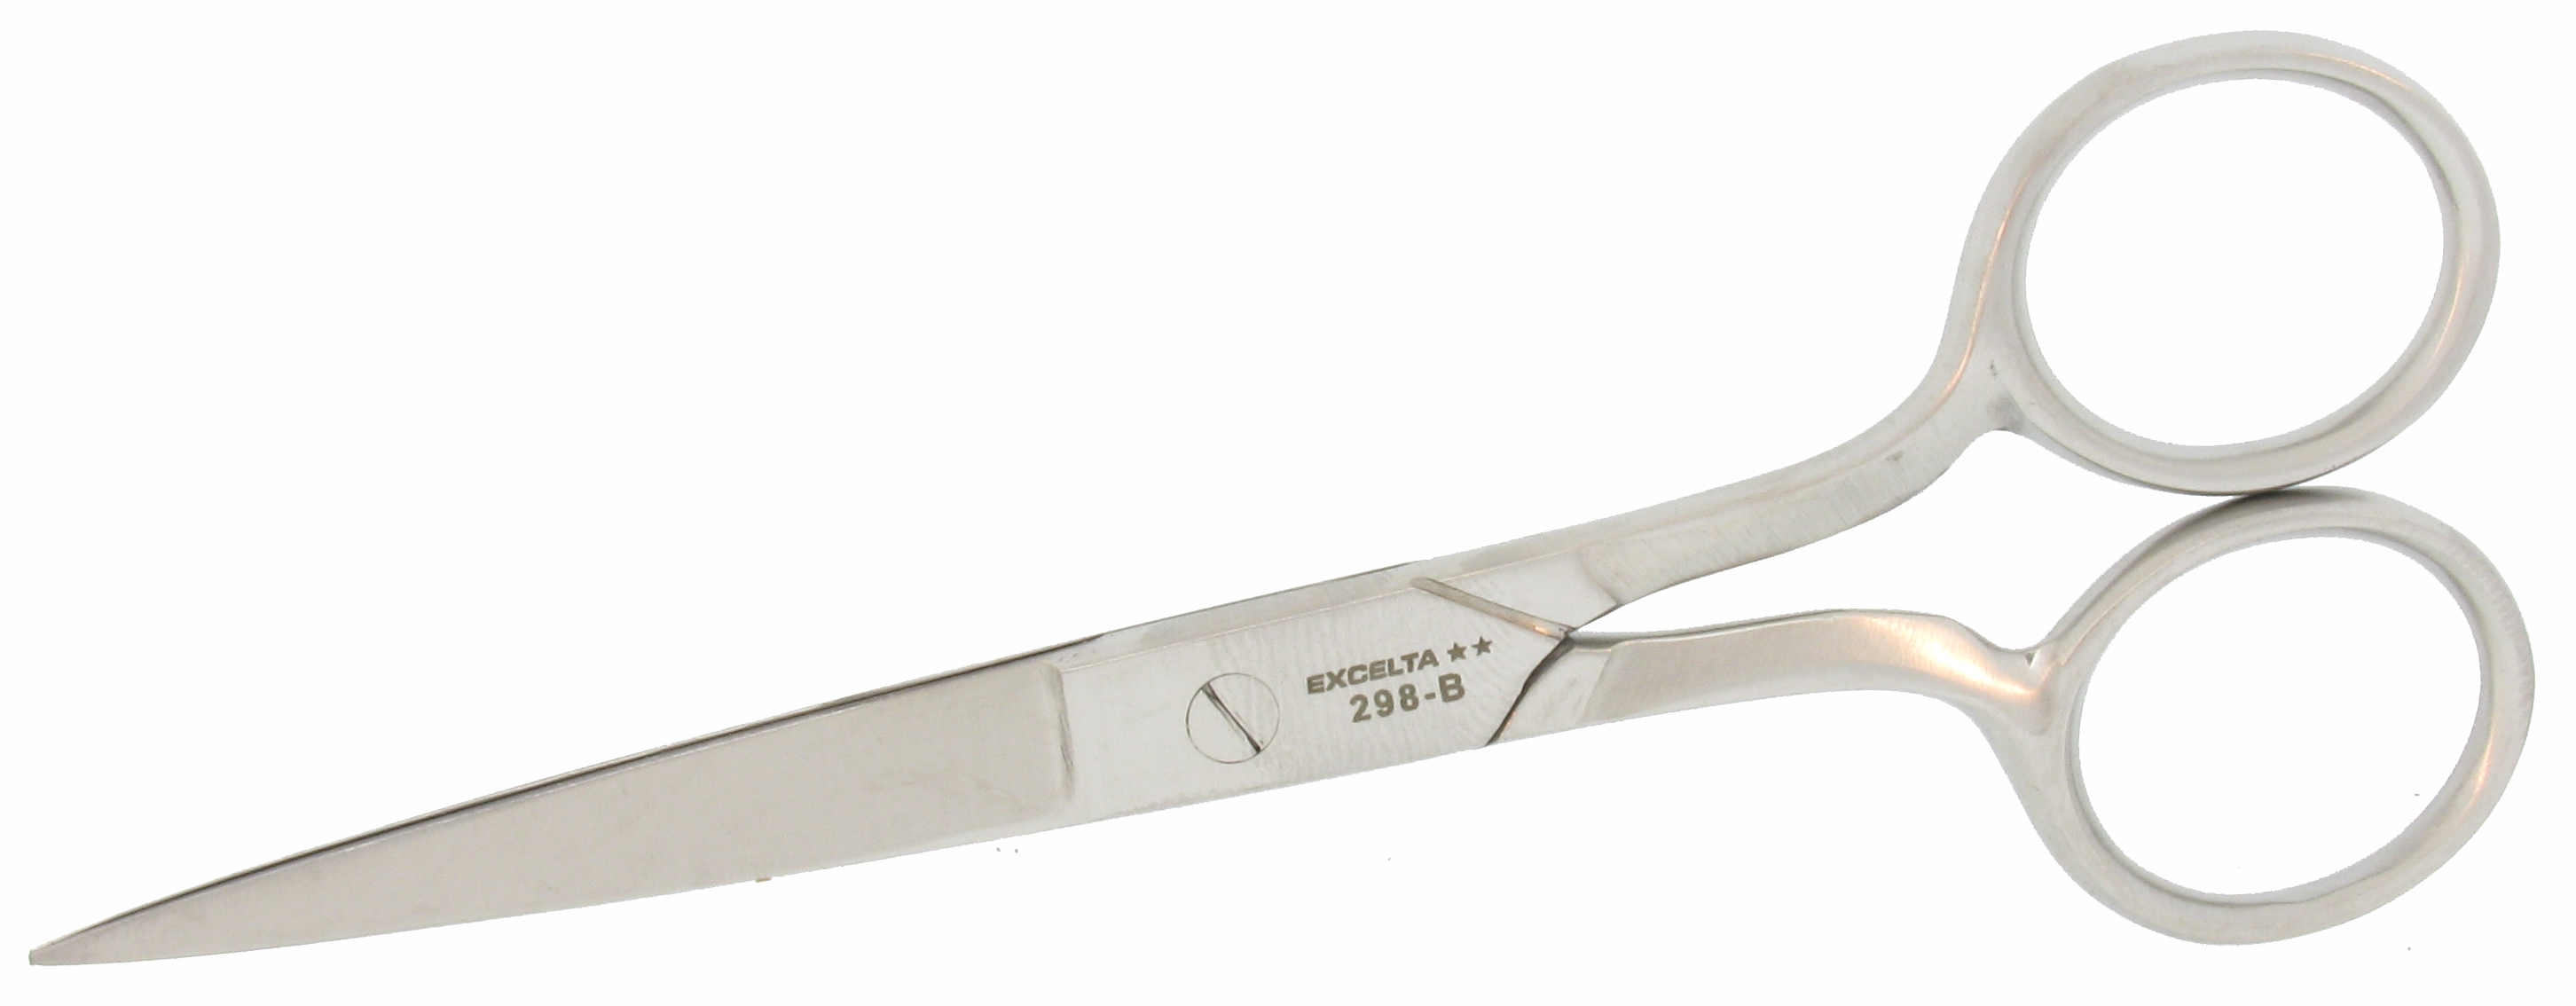 Excelta 298B 5 Inch Straight Scissor With Long 2 Inch Blade